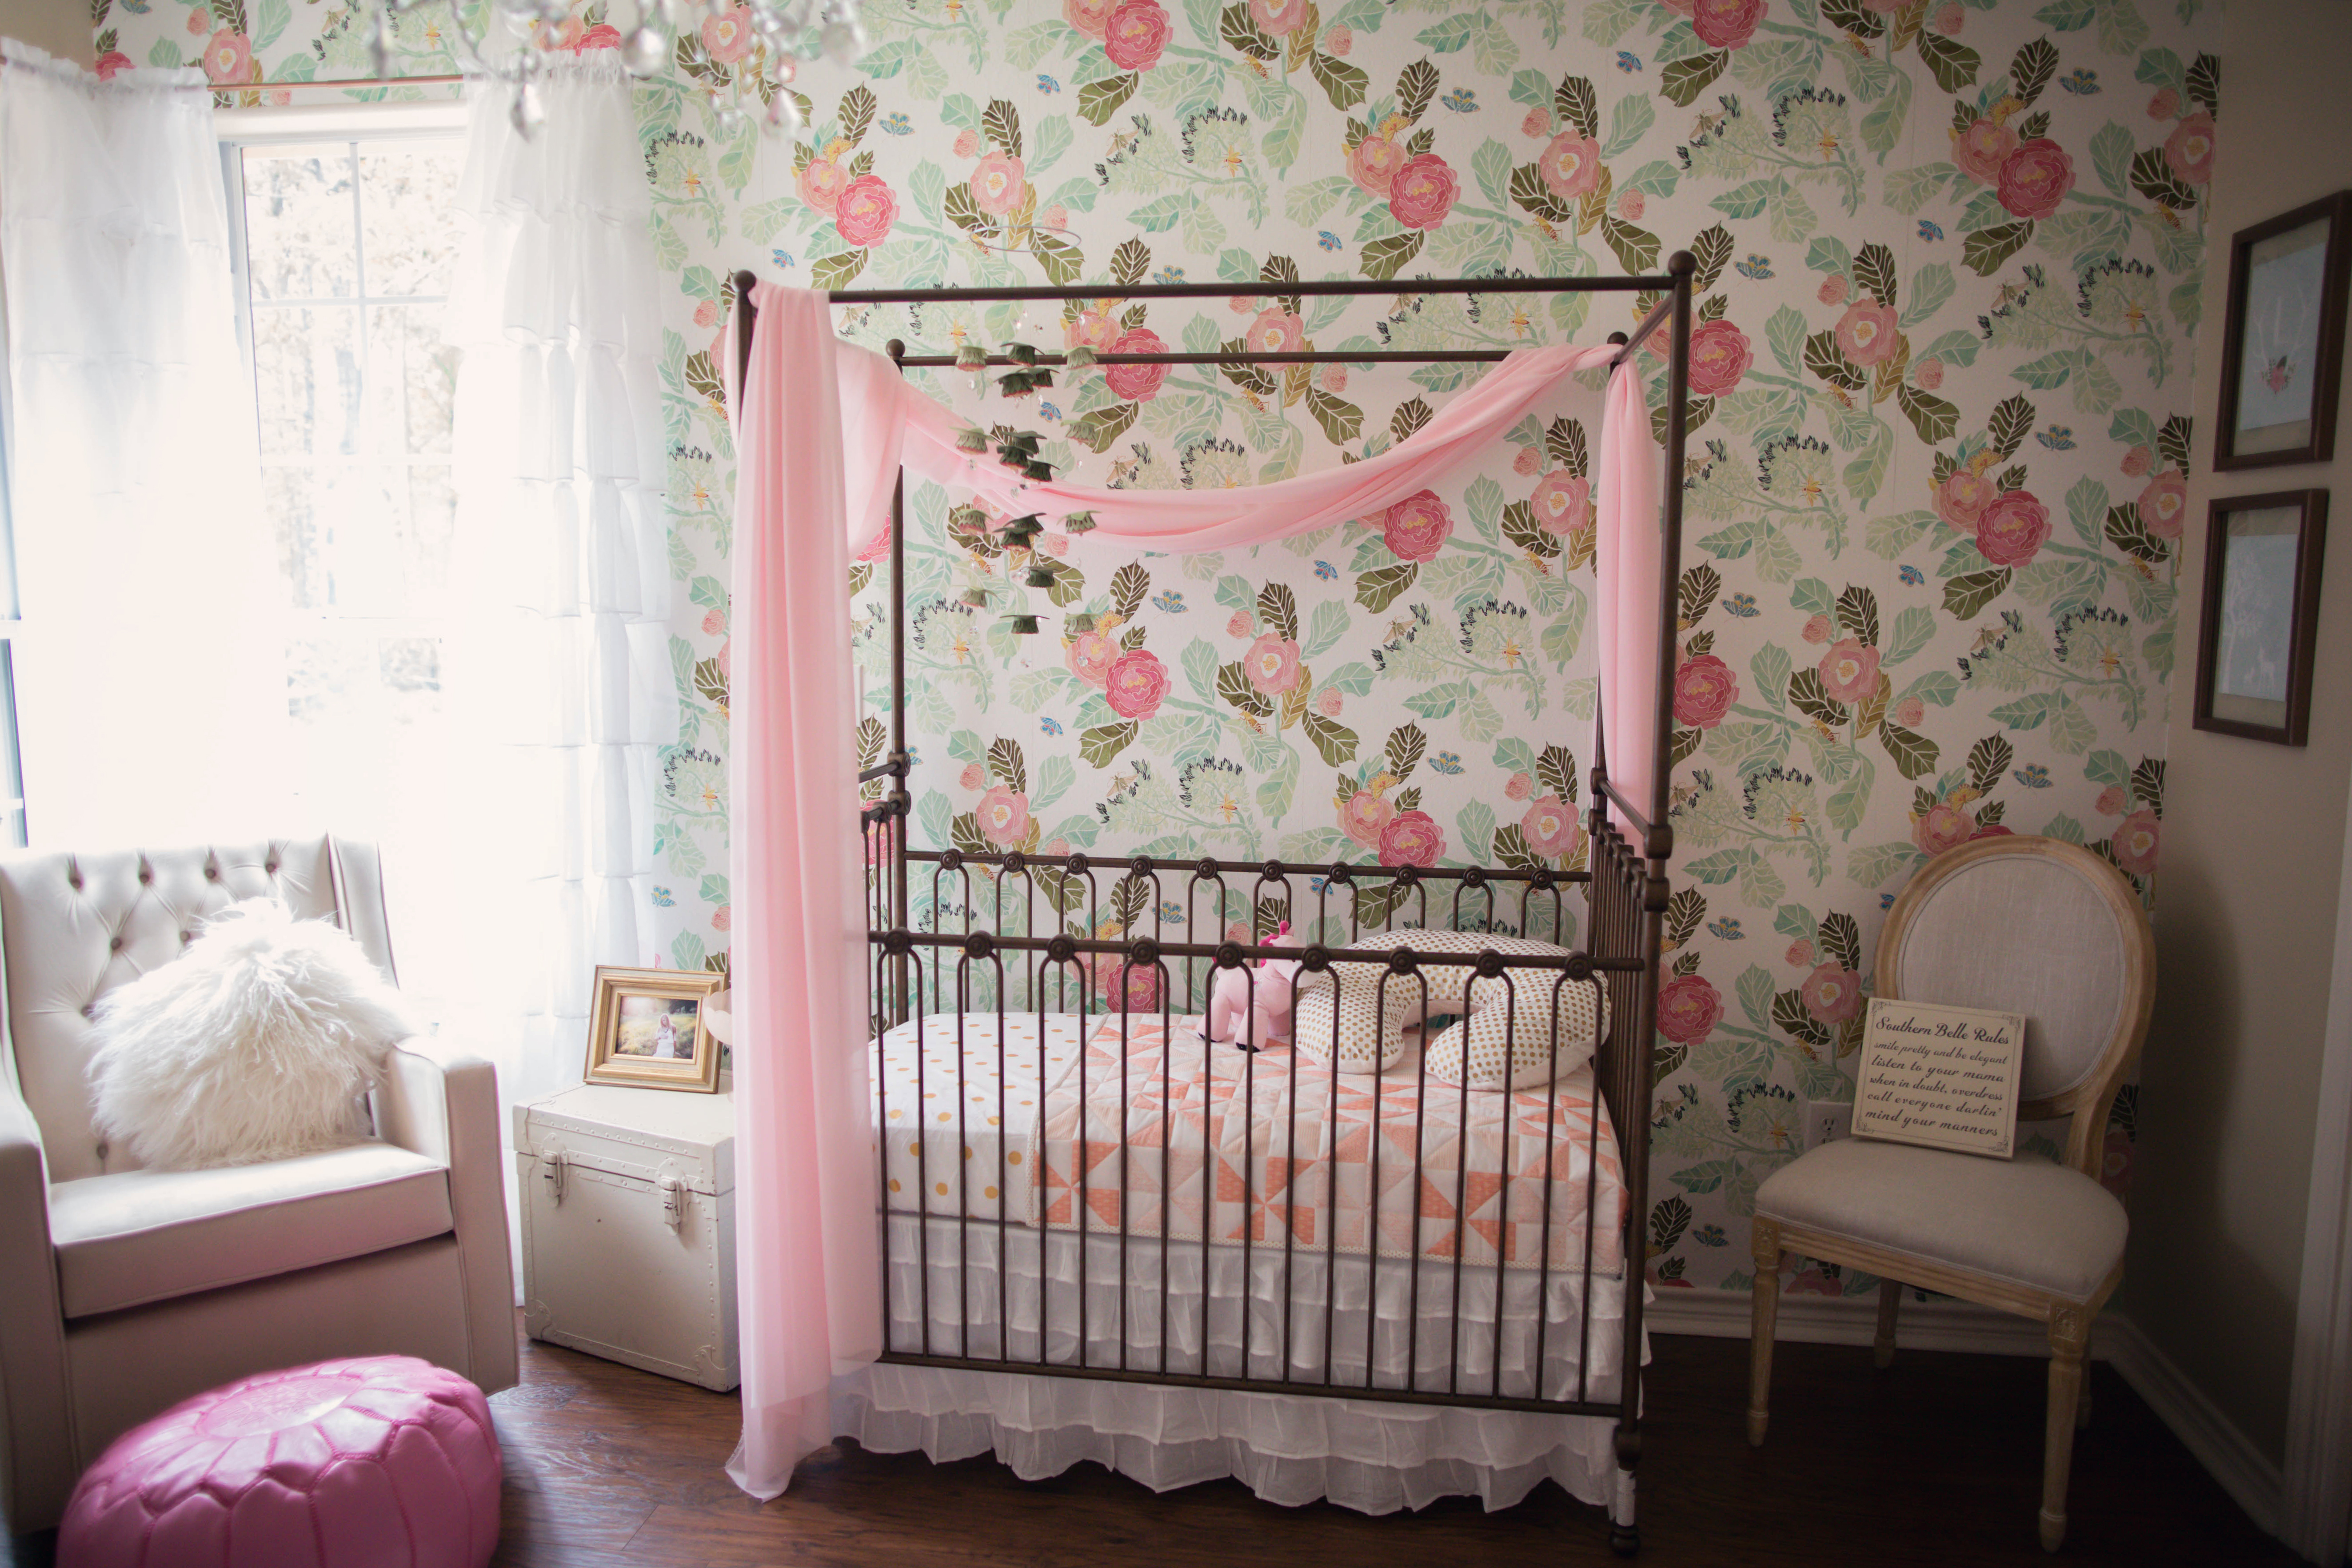 Gold and Floral Nursery